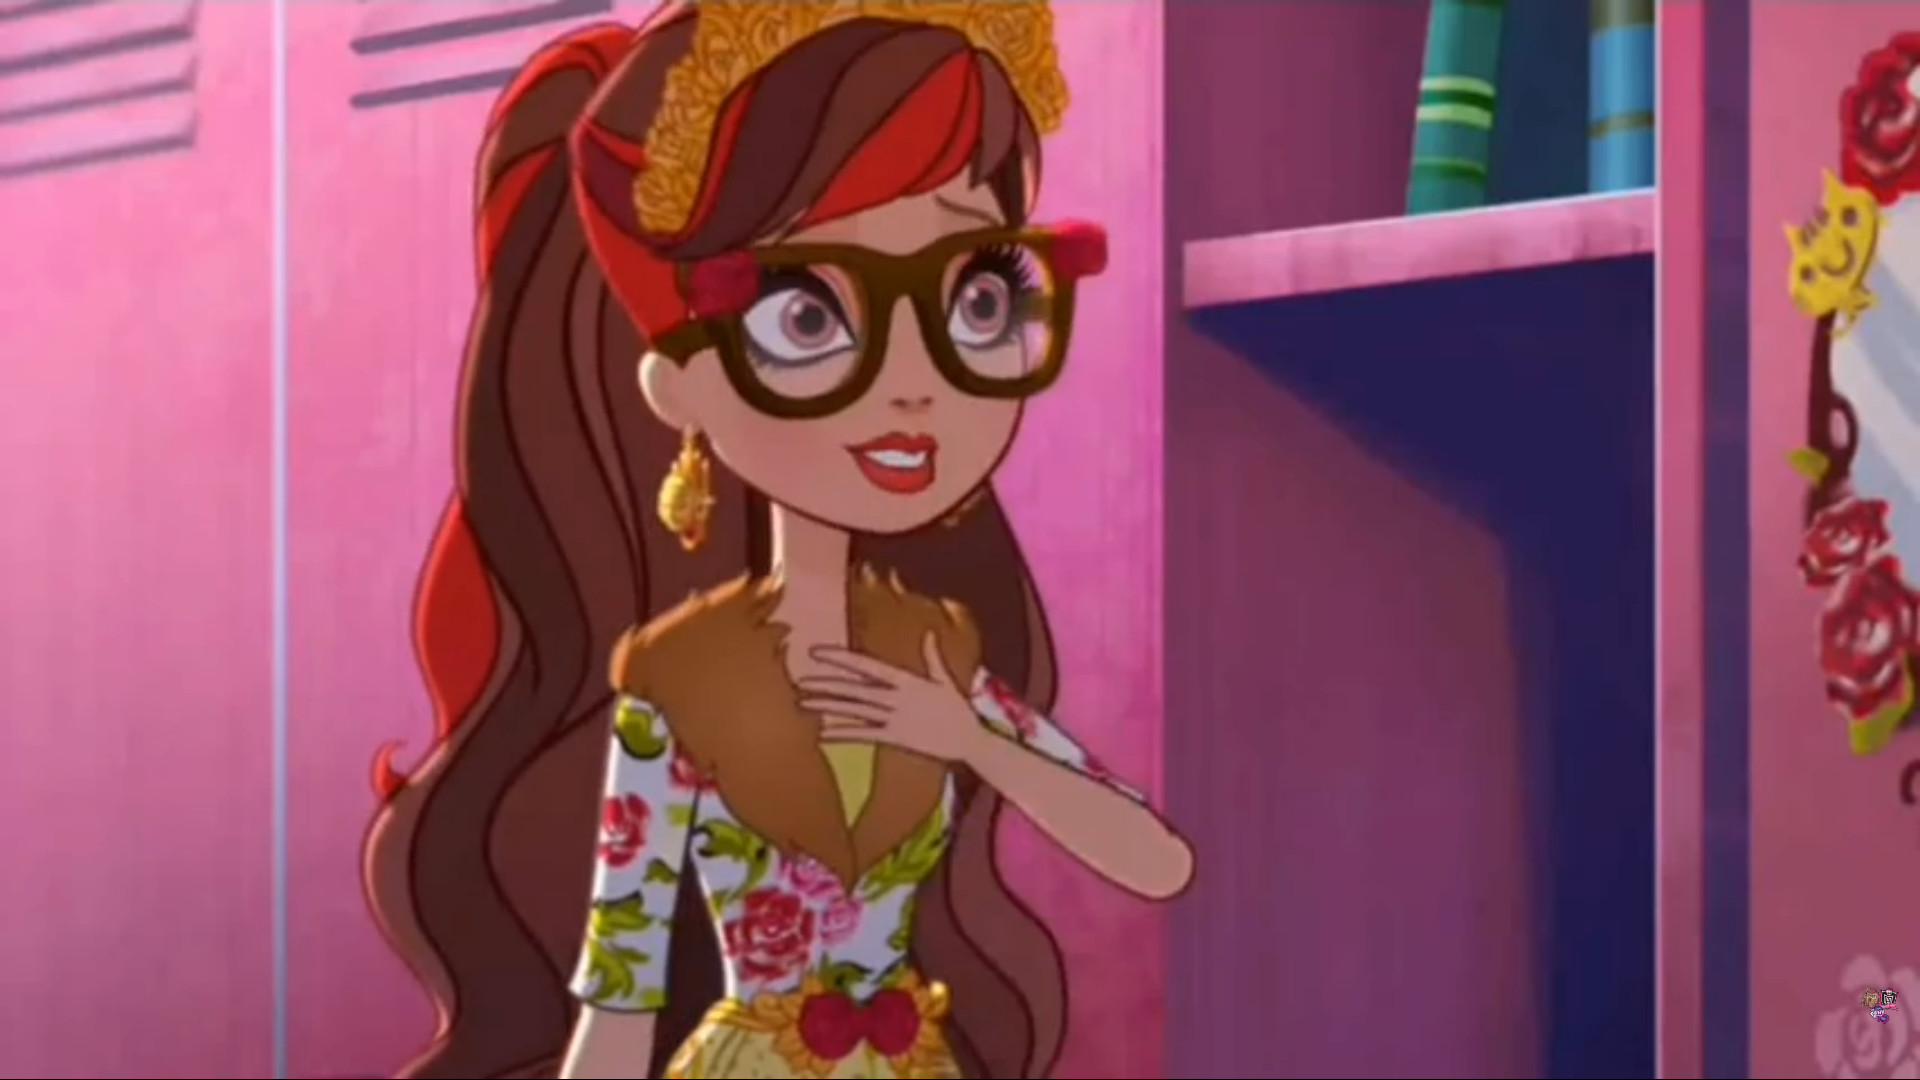 1920x1080 Rosabella Beauty - Ever AFter High clip.png